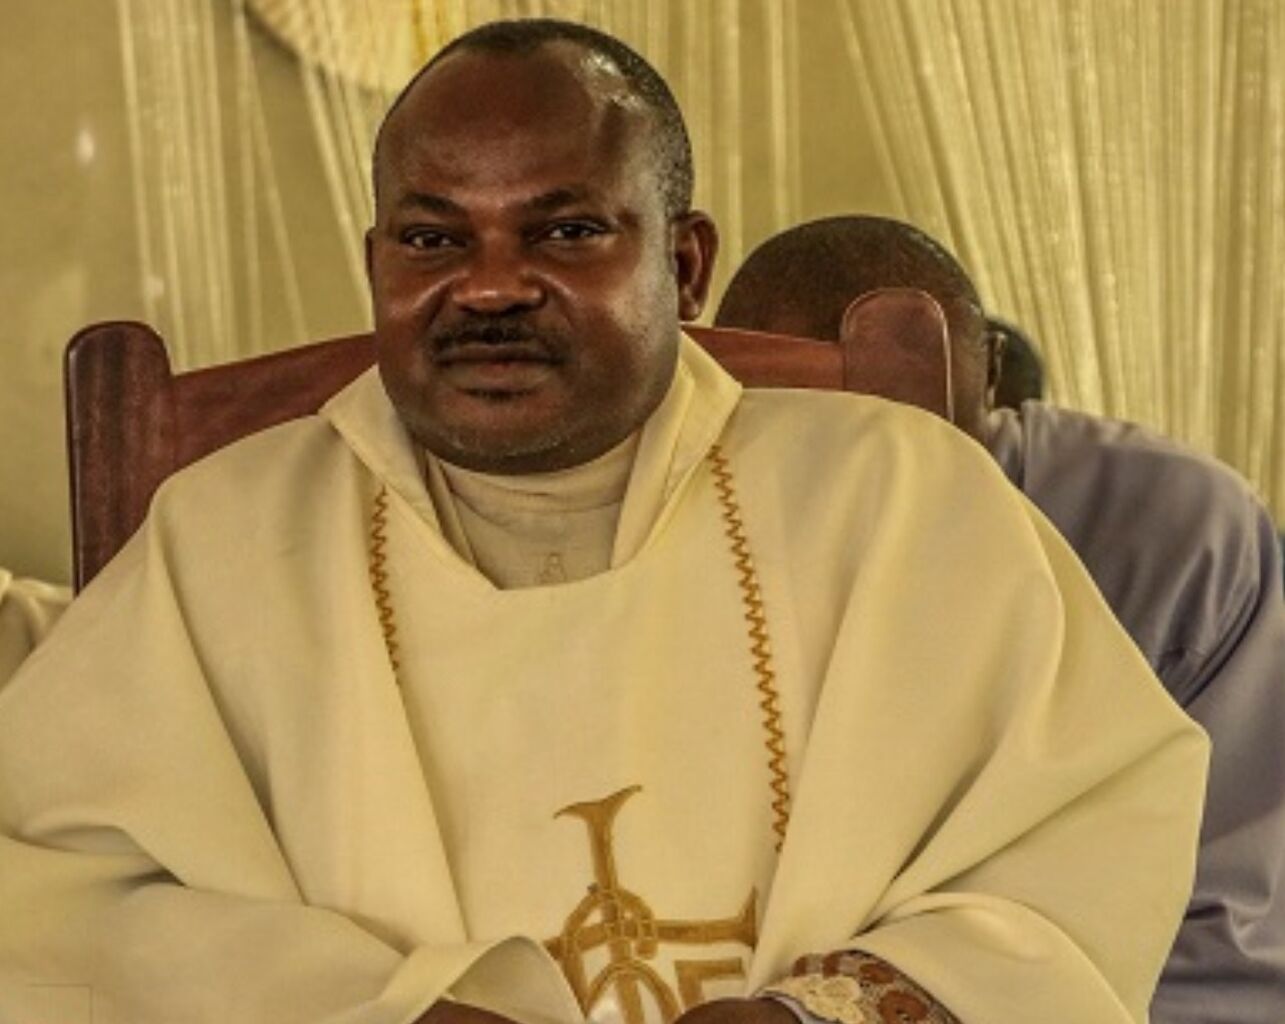 Parish Priest of St. James The Greater Parish, Ugbawka in Nkanu East Local Government Area, Reverend Father Paul Offu